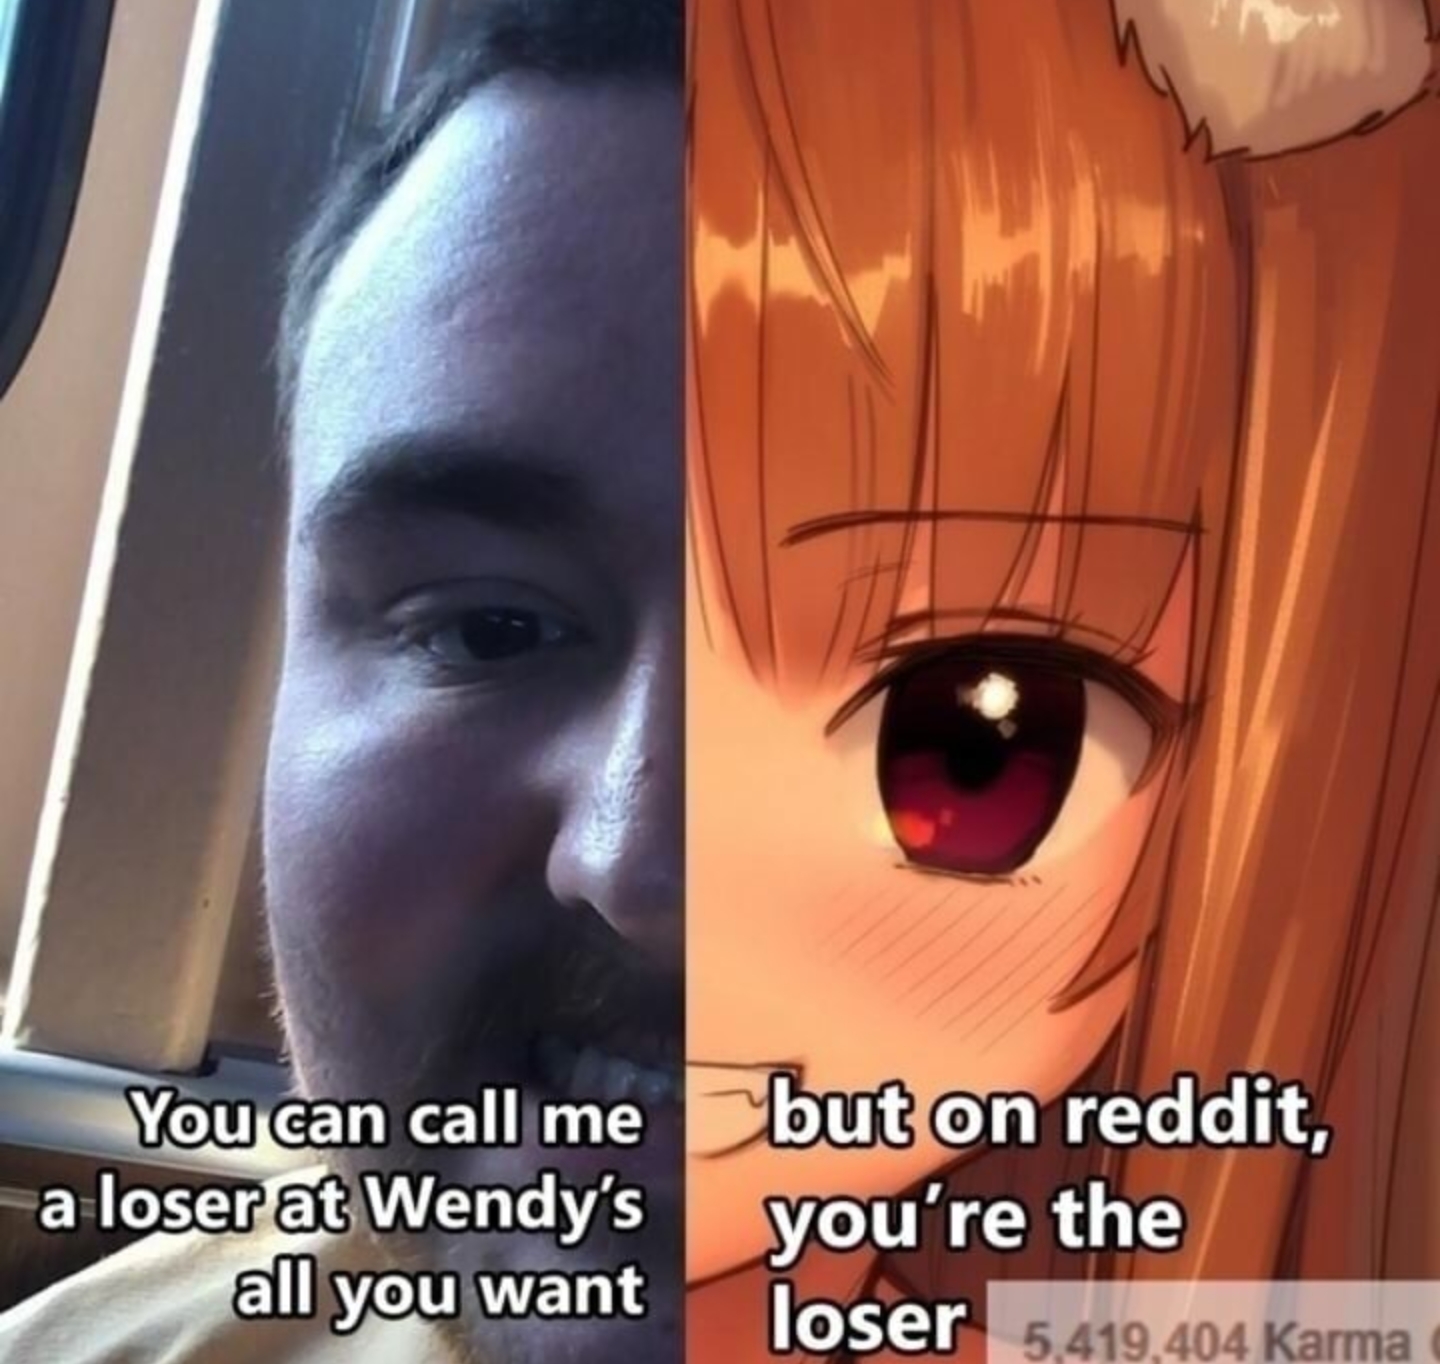 but on reddit you re the loser - You can call me a loser at Wendy's all you want but on reddit, you're the loser 5.419,404 Karma